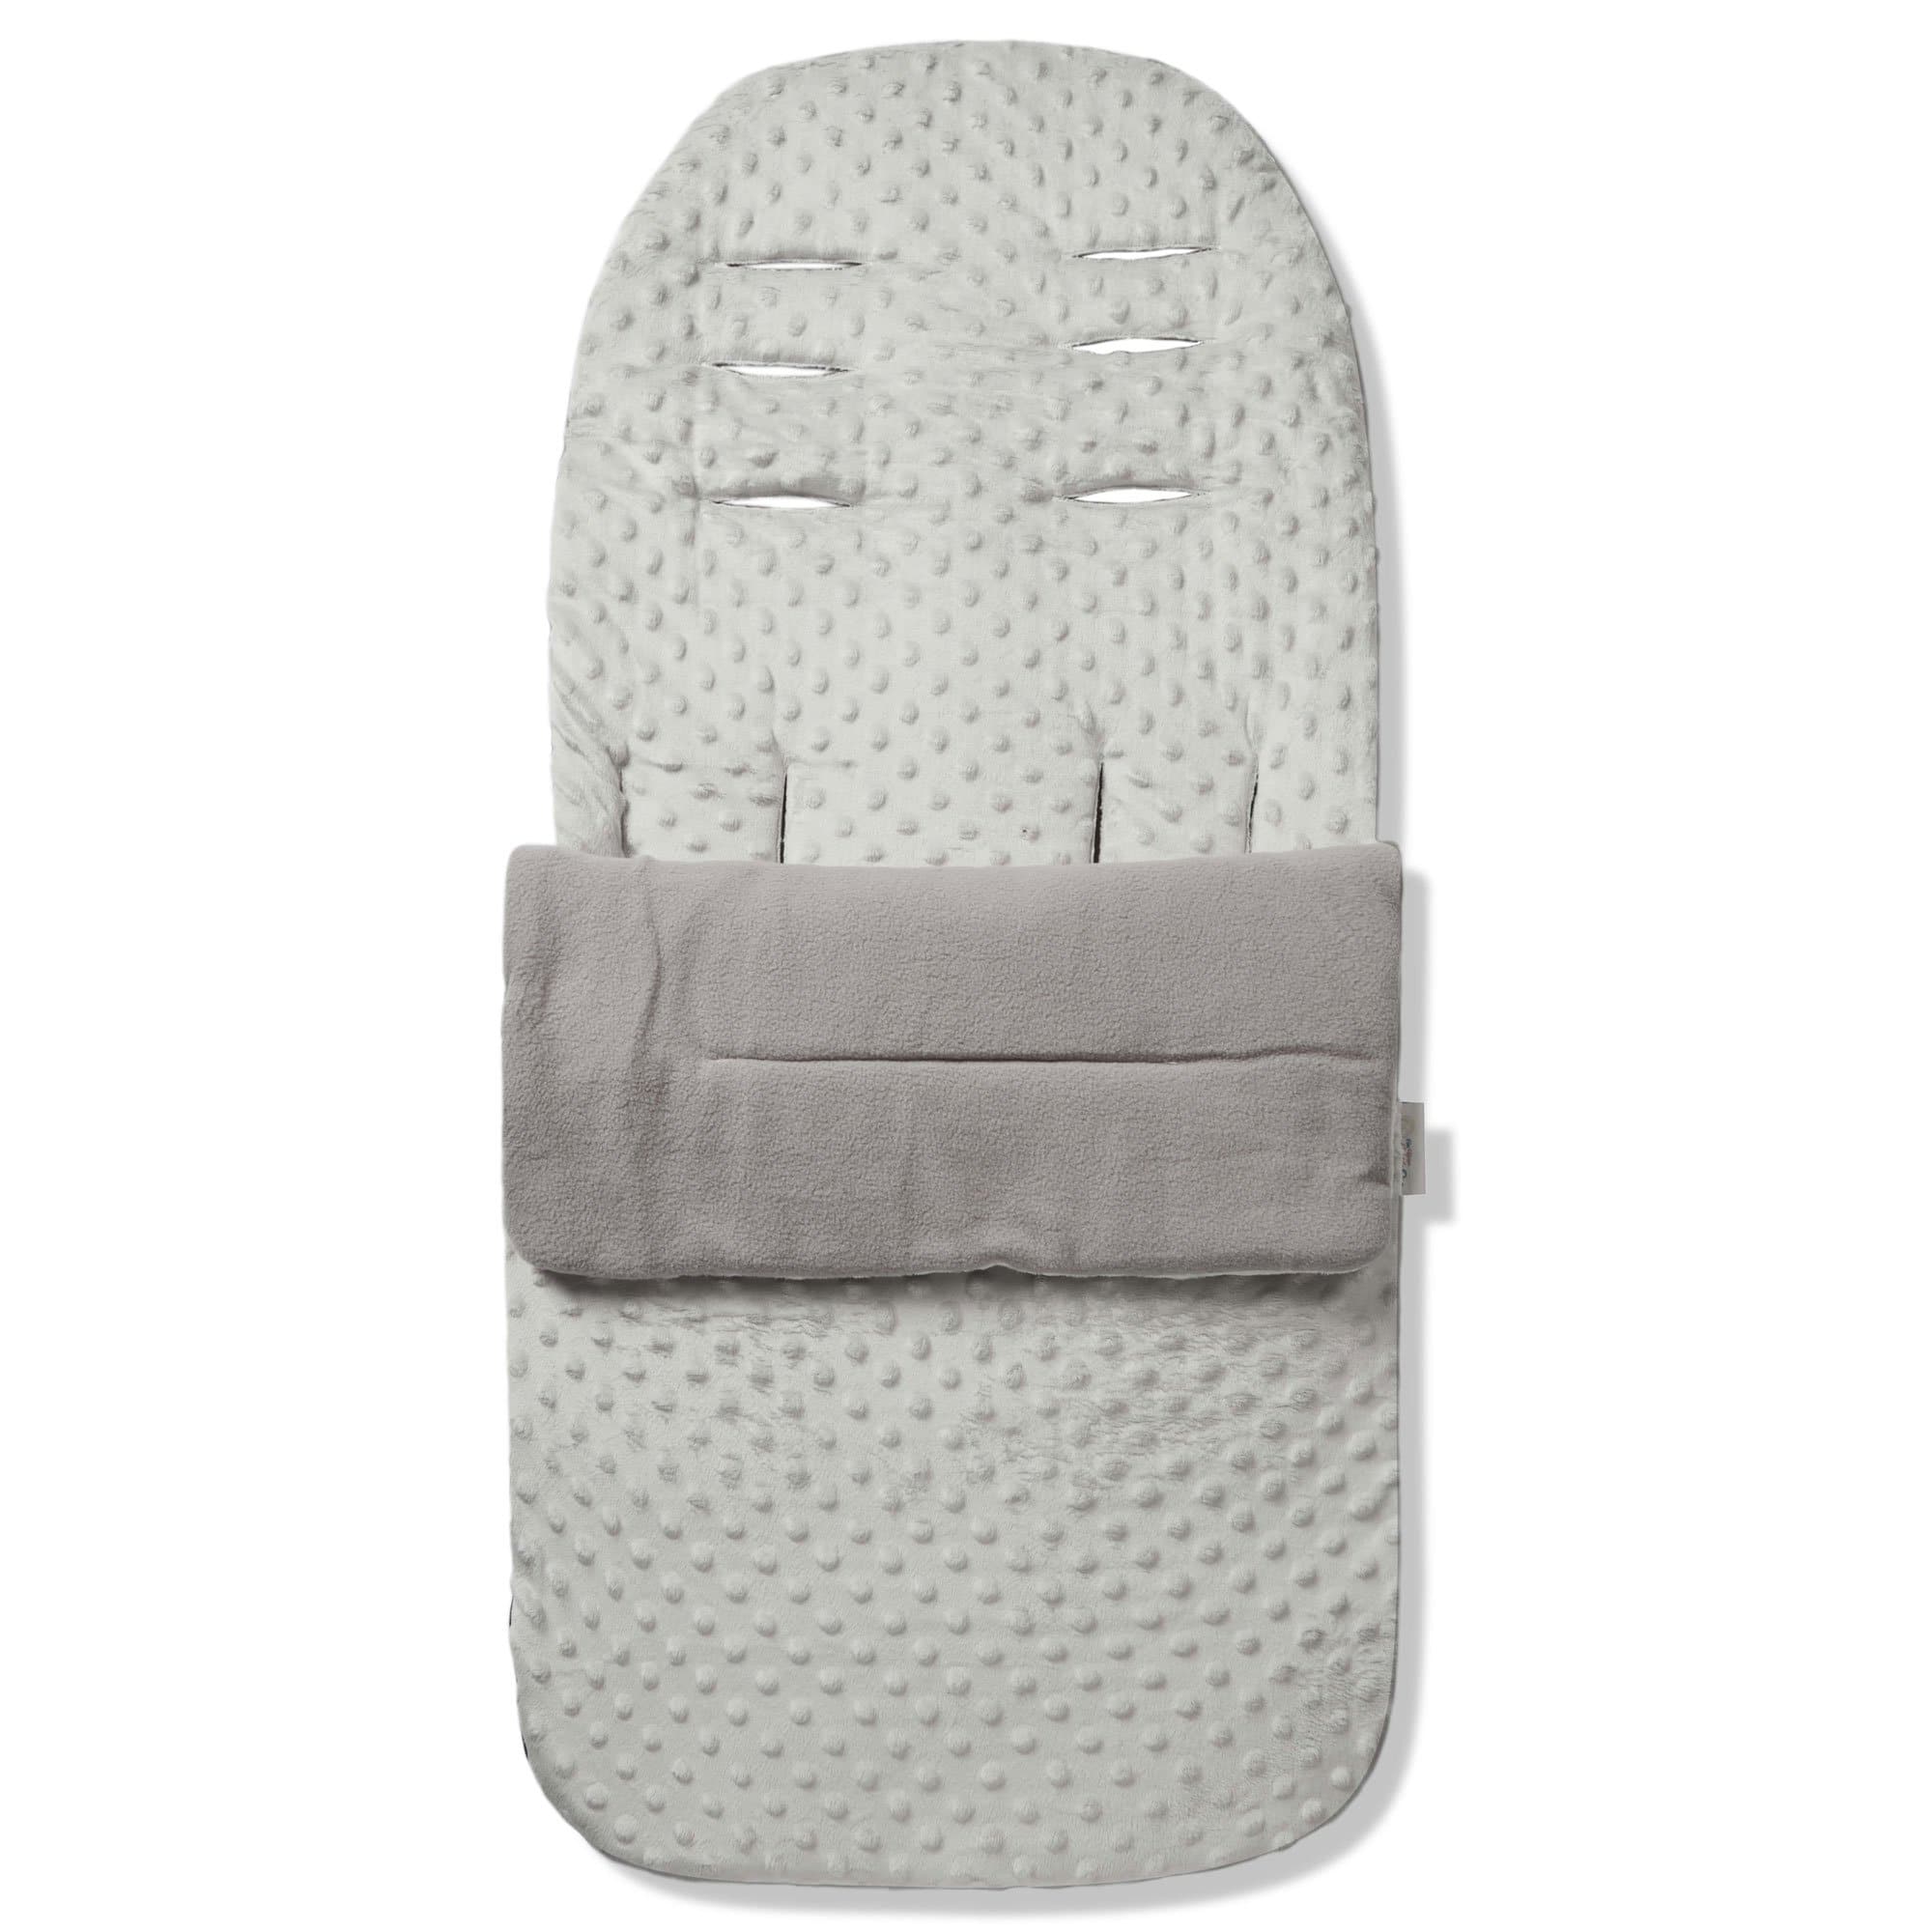 Dimple Footmuff / Cosy Toes Compatible with Seed - Grey / Fits All Models | For Your Little One